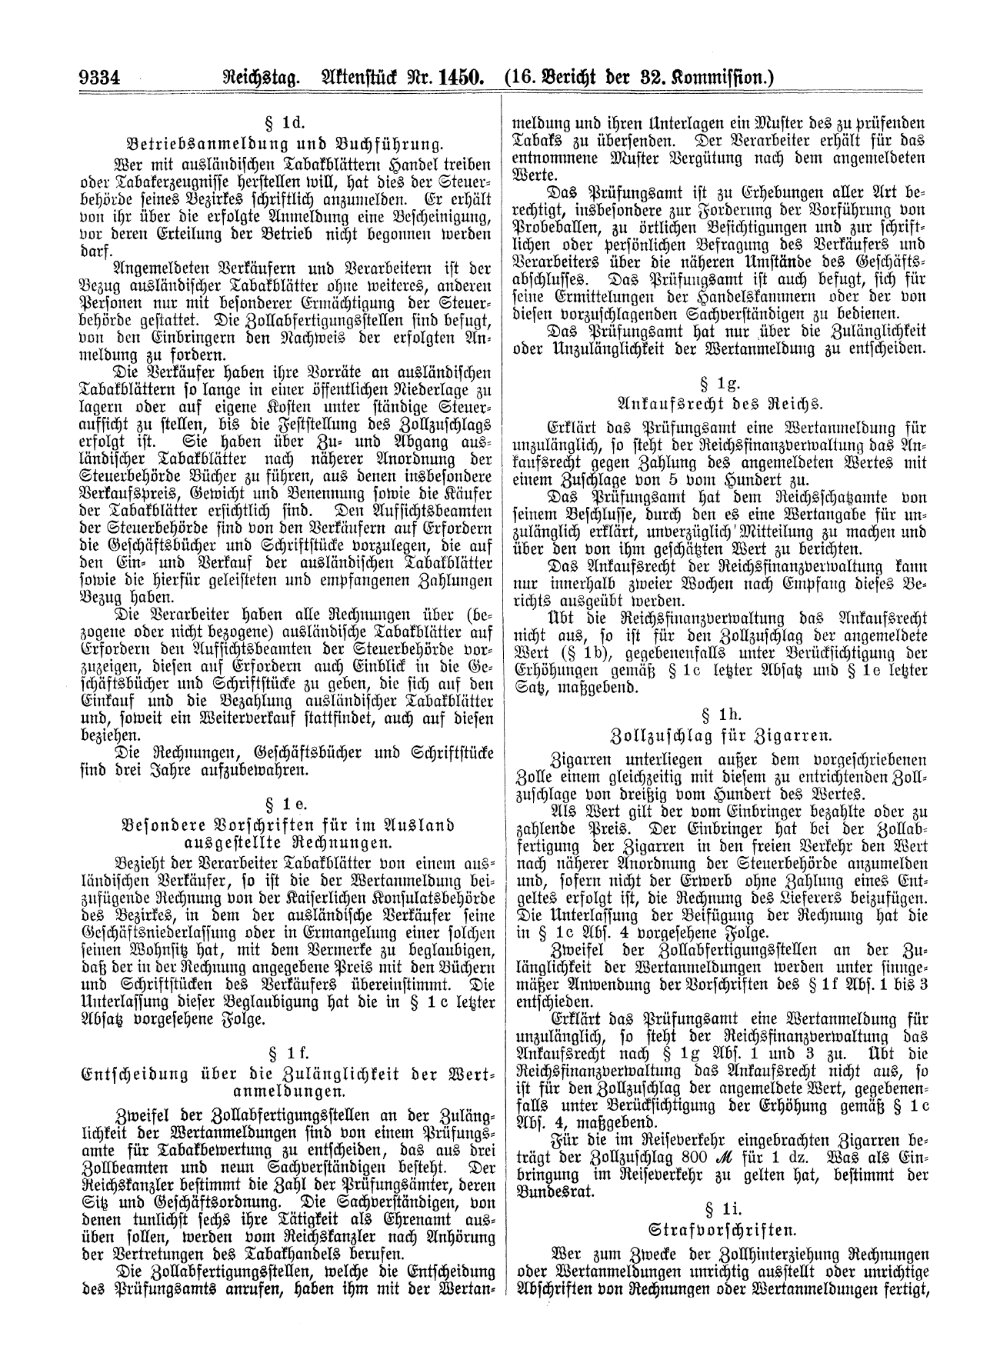 Scan of page 9334